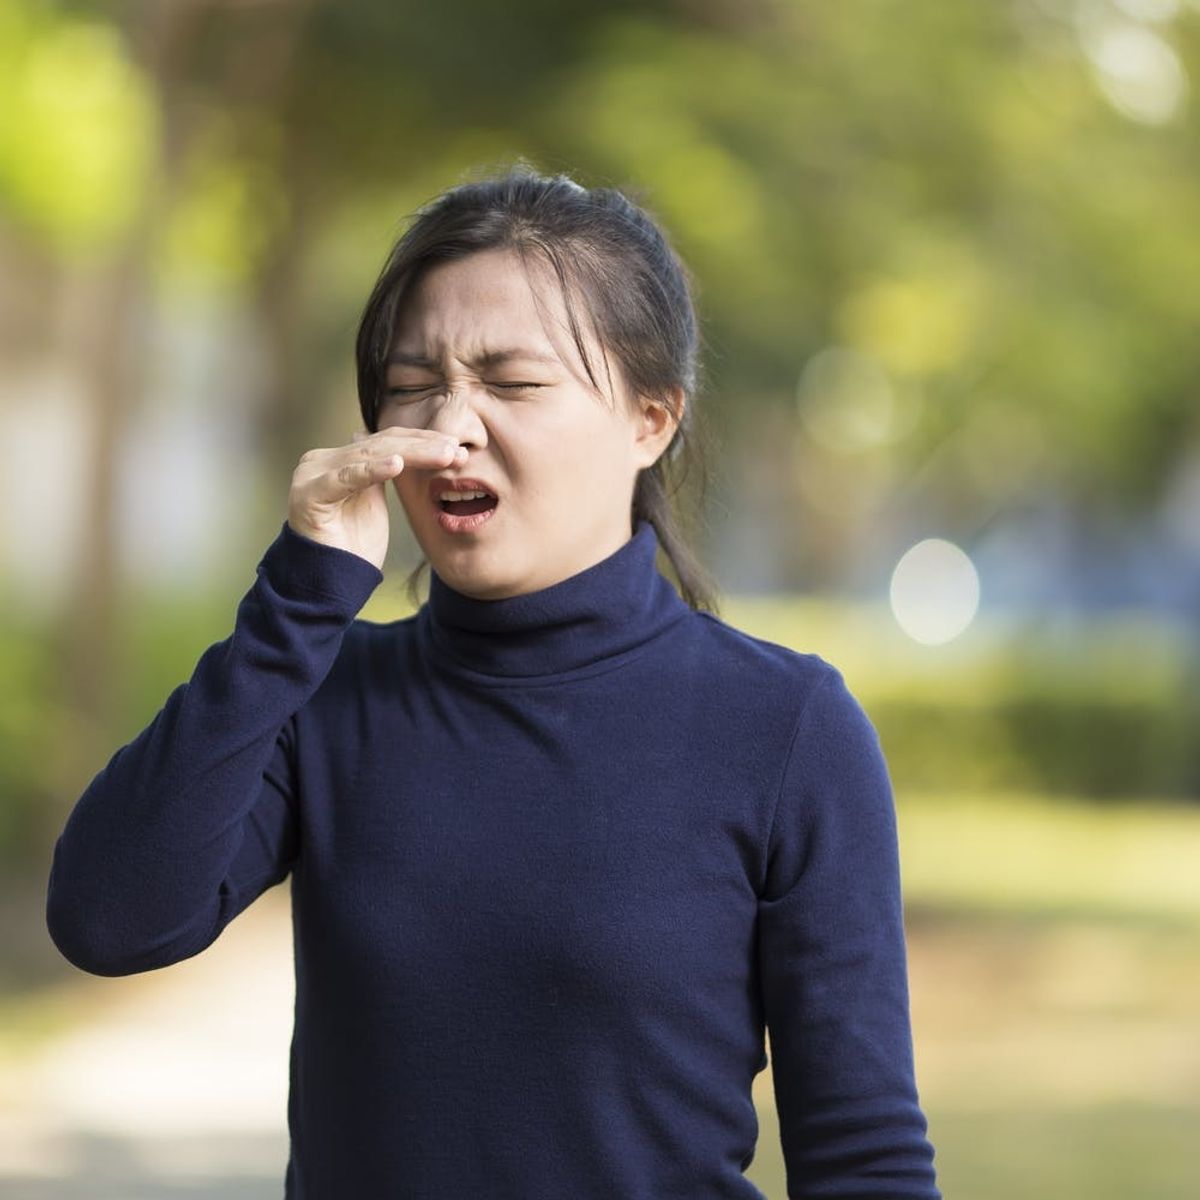 If You’re Reading This, You’re Probably Sneezing Wrong and It’s Gross